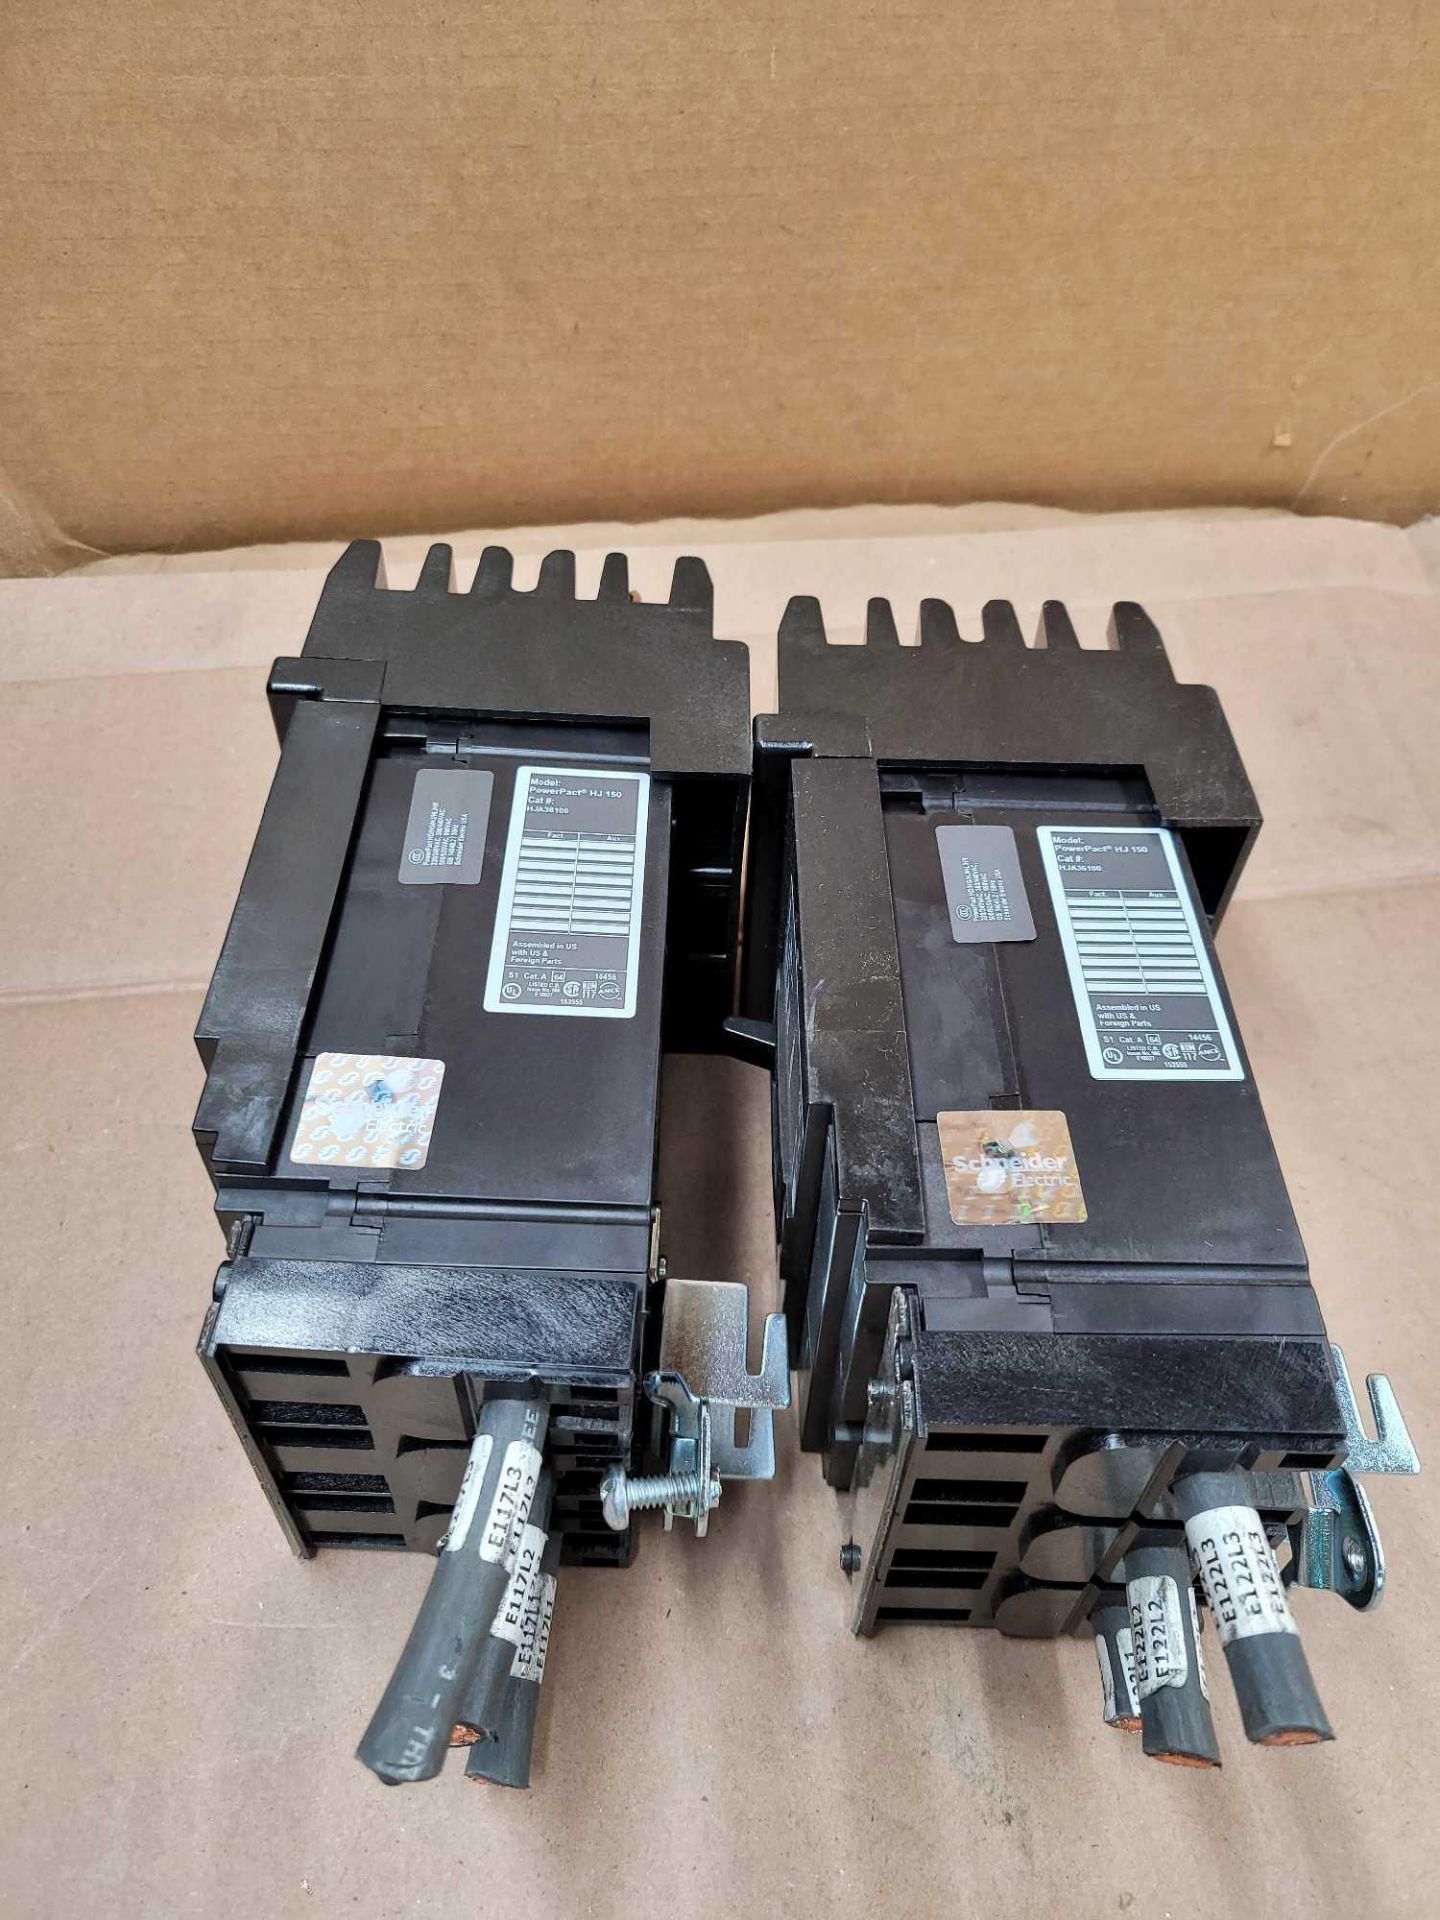 LOT OF 2 SQUARE D HJA36100 / 100 Amp Molded Case Circuit Breaker  /  Lot Weight: 9.6 lbs - Image 5 of 6